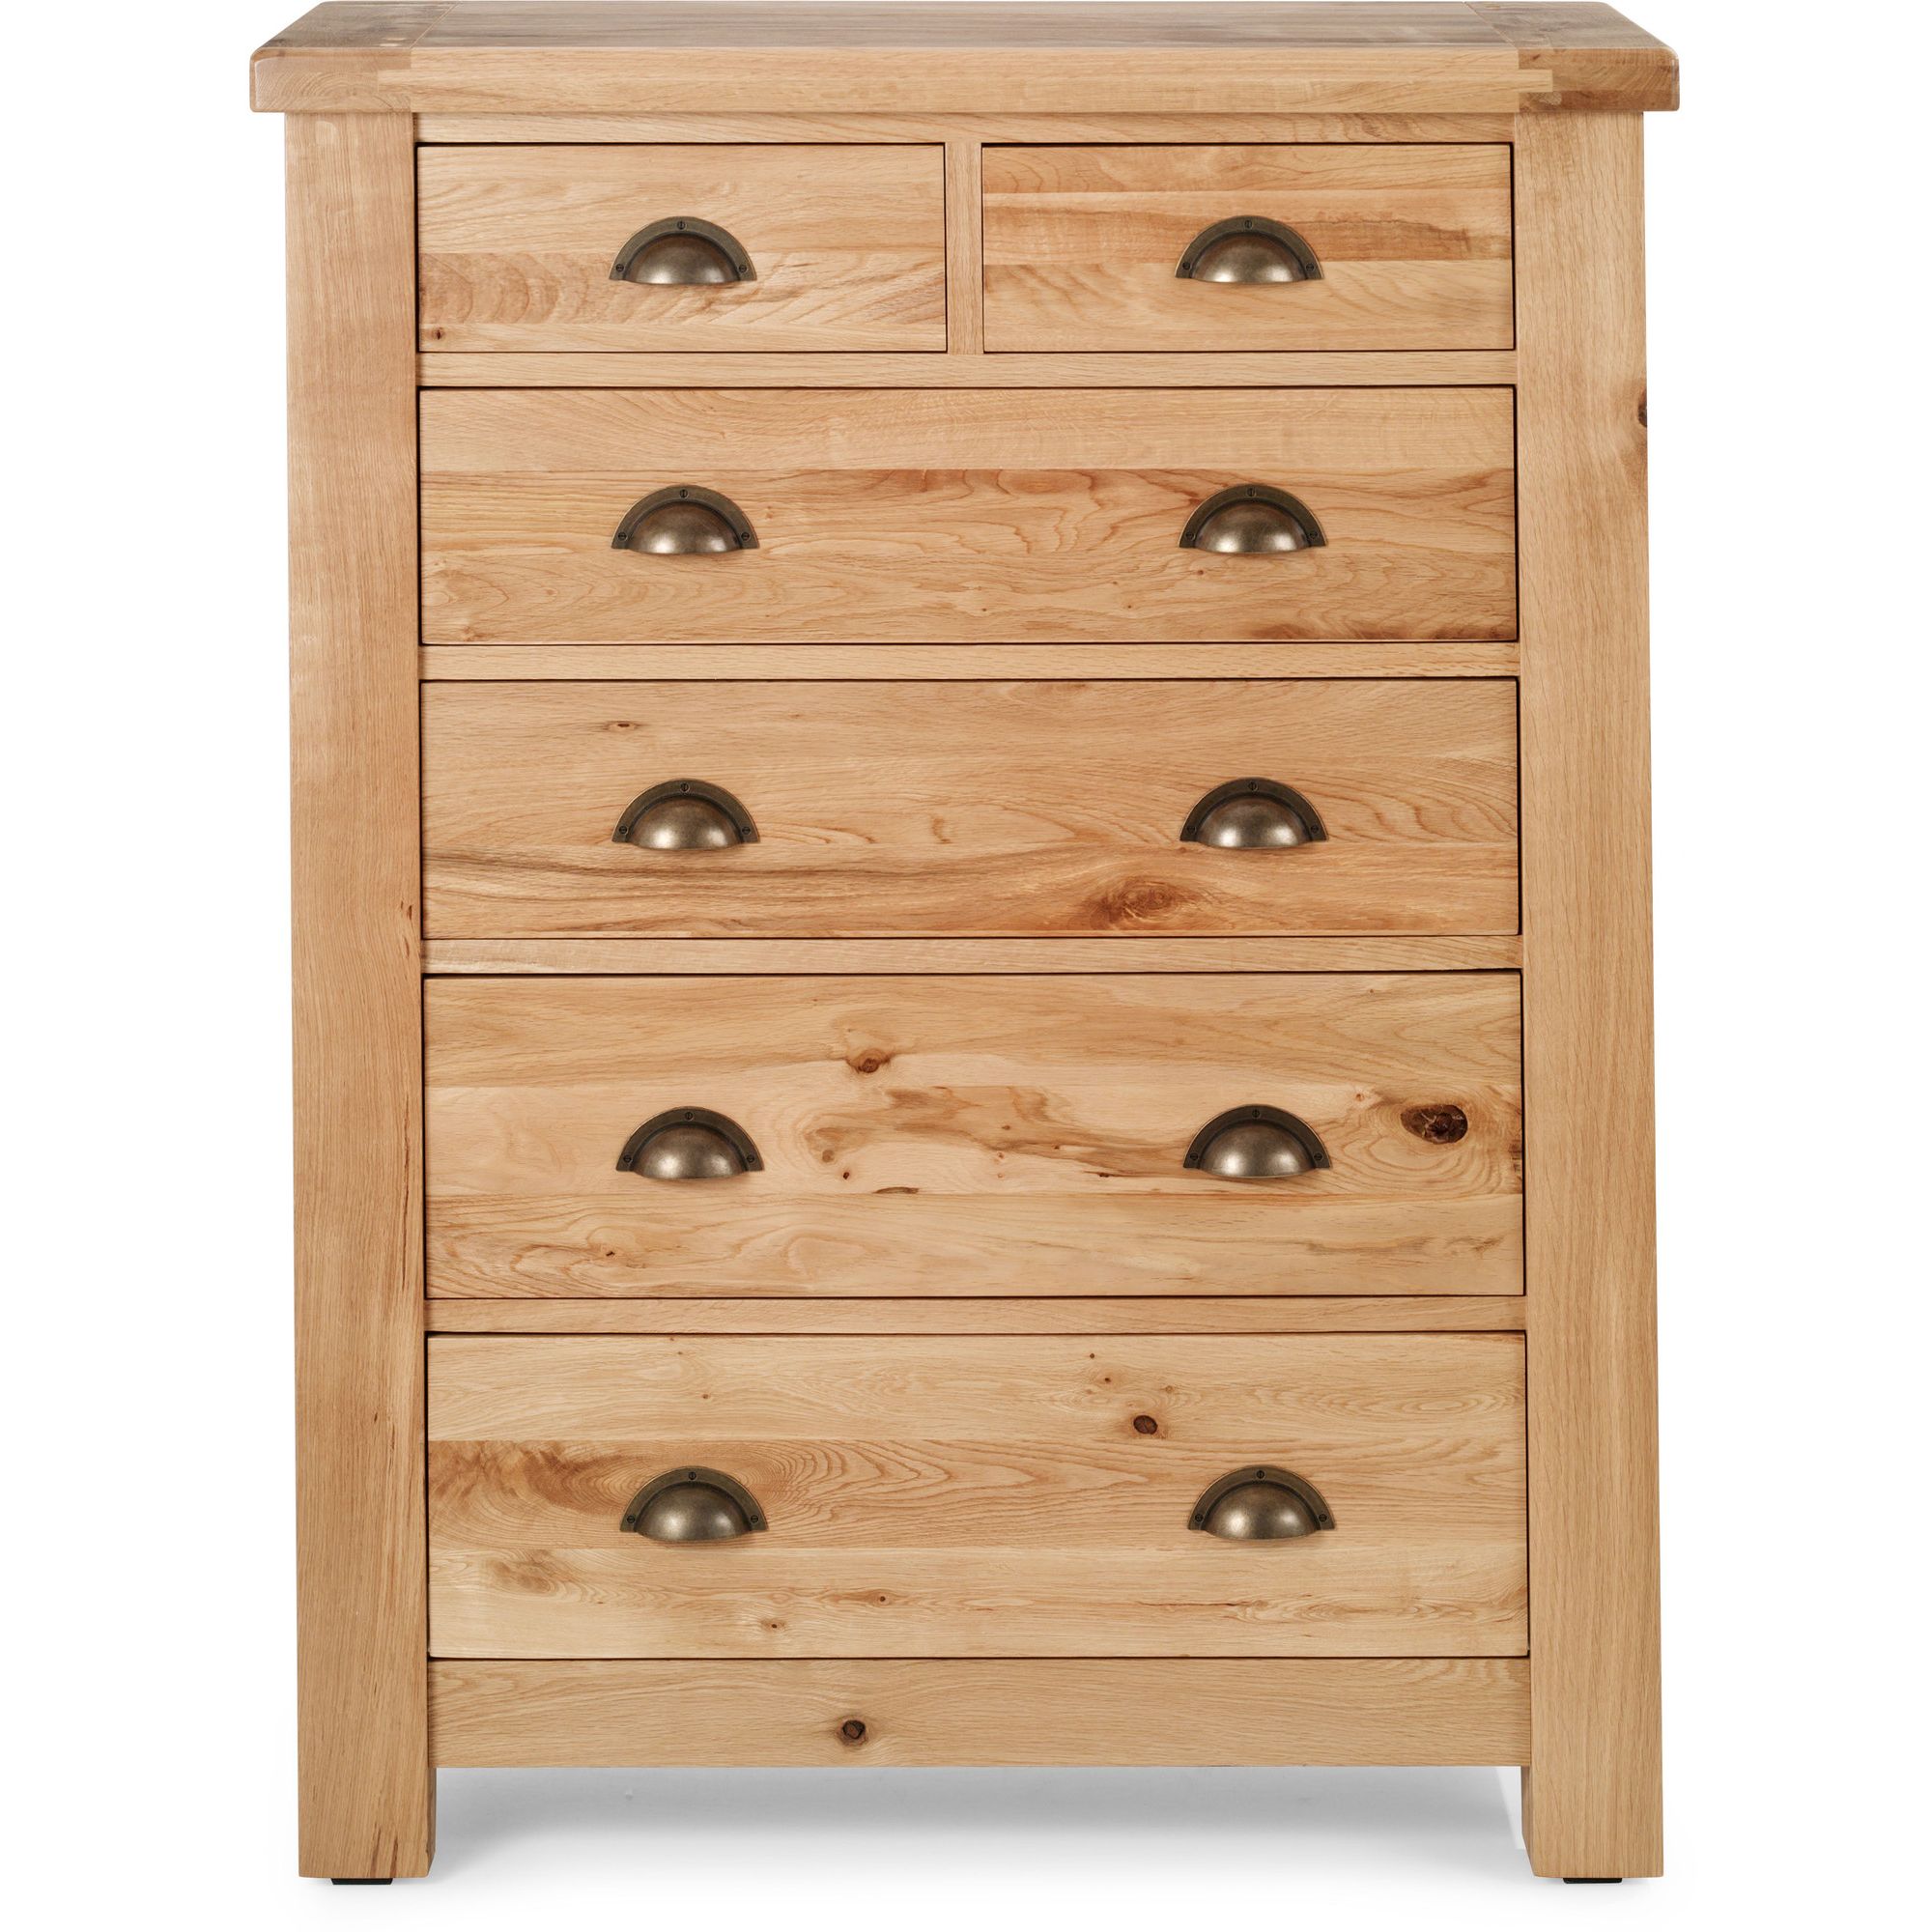 Originals Normandy 2+4 Drawer Chest at Tesco Direct